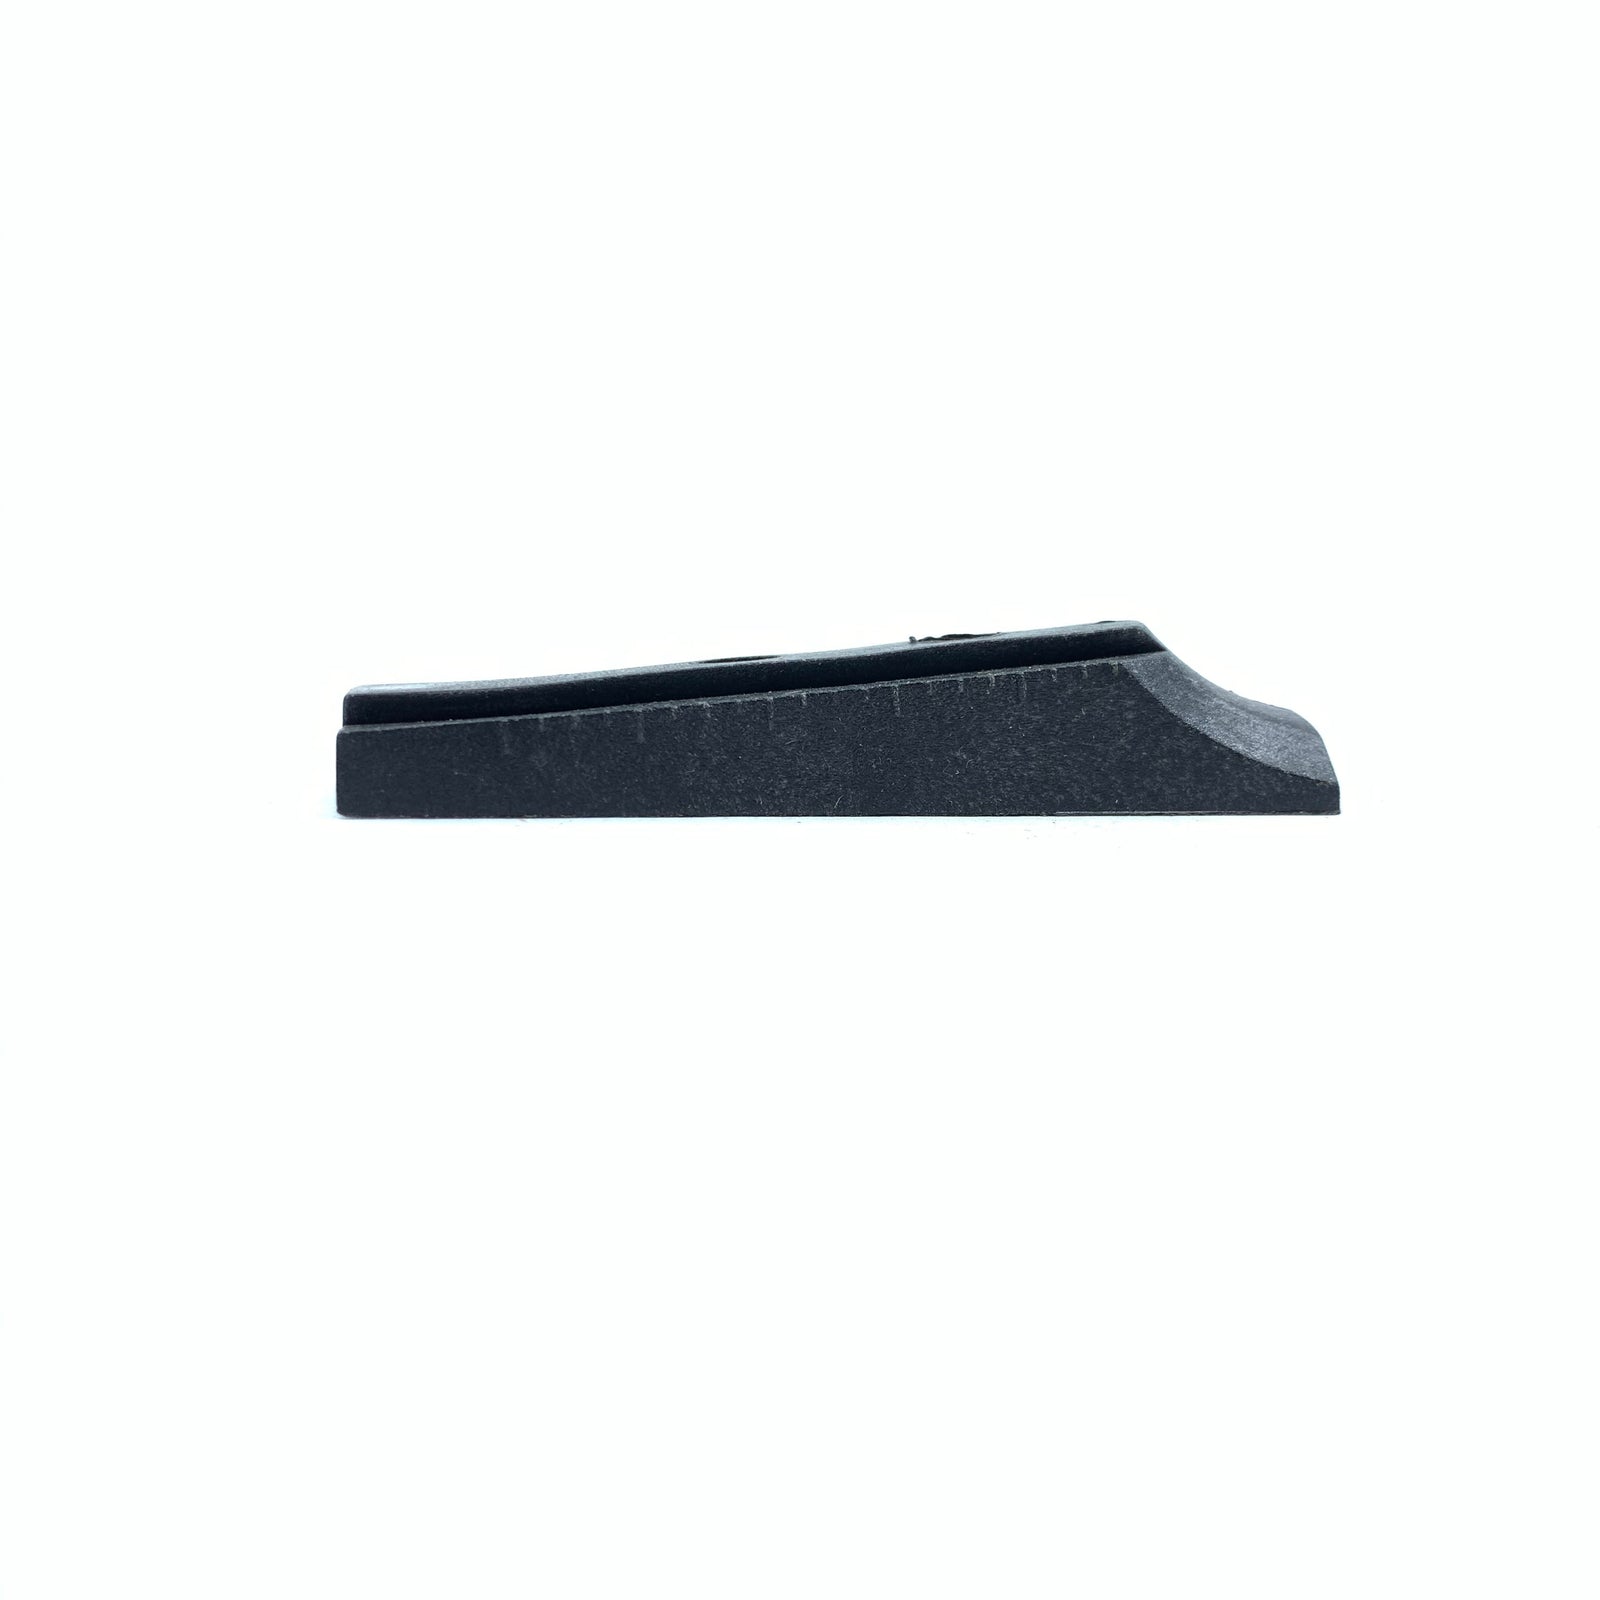 Remington New Style Nylon Plastic Rear Sight Base Only for 700, 7400, 7600 Rifles